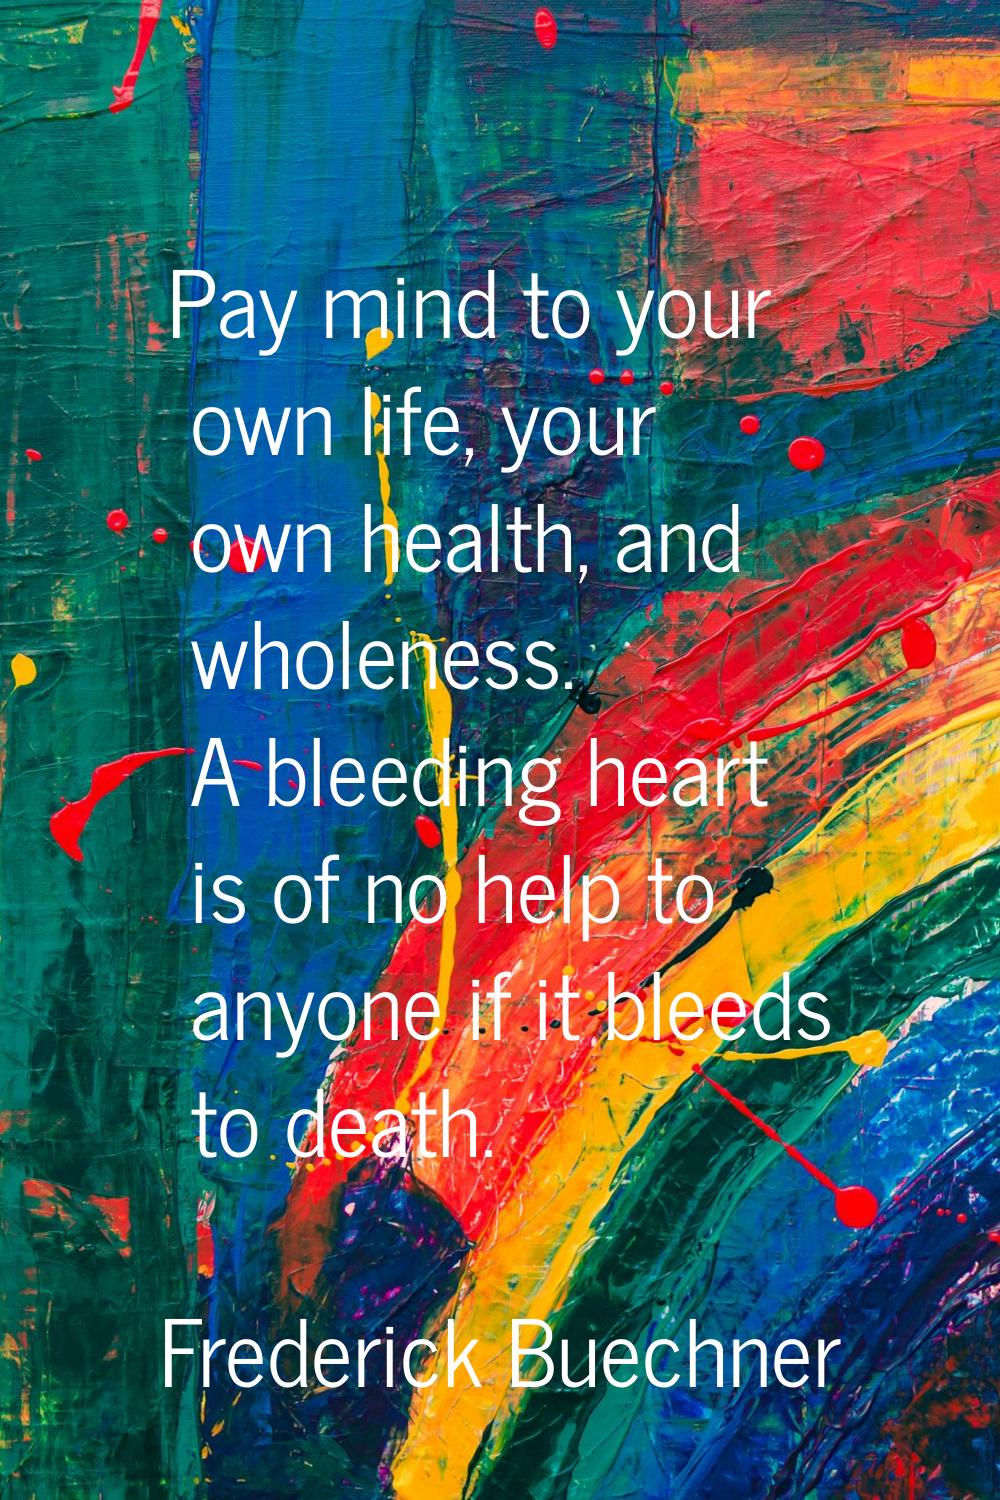 Pay mind to your own life, your own health, and wholeness. A bleeding heart is of no help to anyone